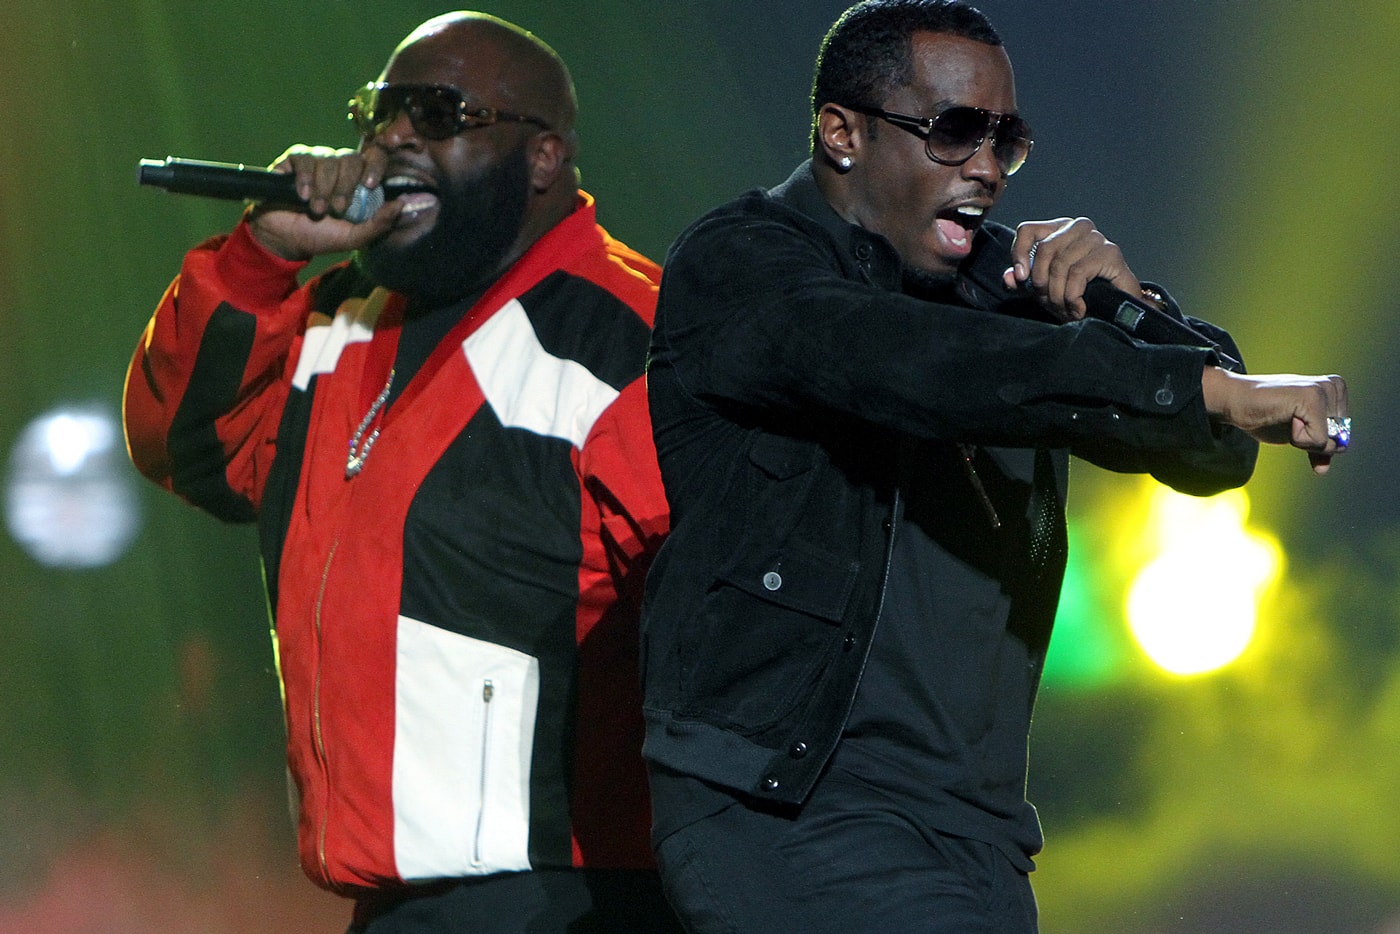 diddy-dirty-money-featuring-rick-ross-ti-hello-good-morning